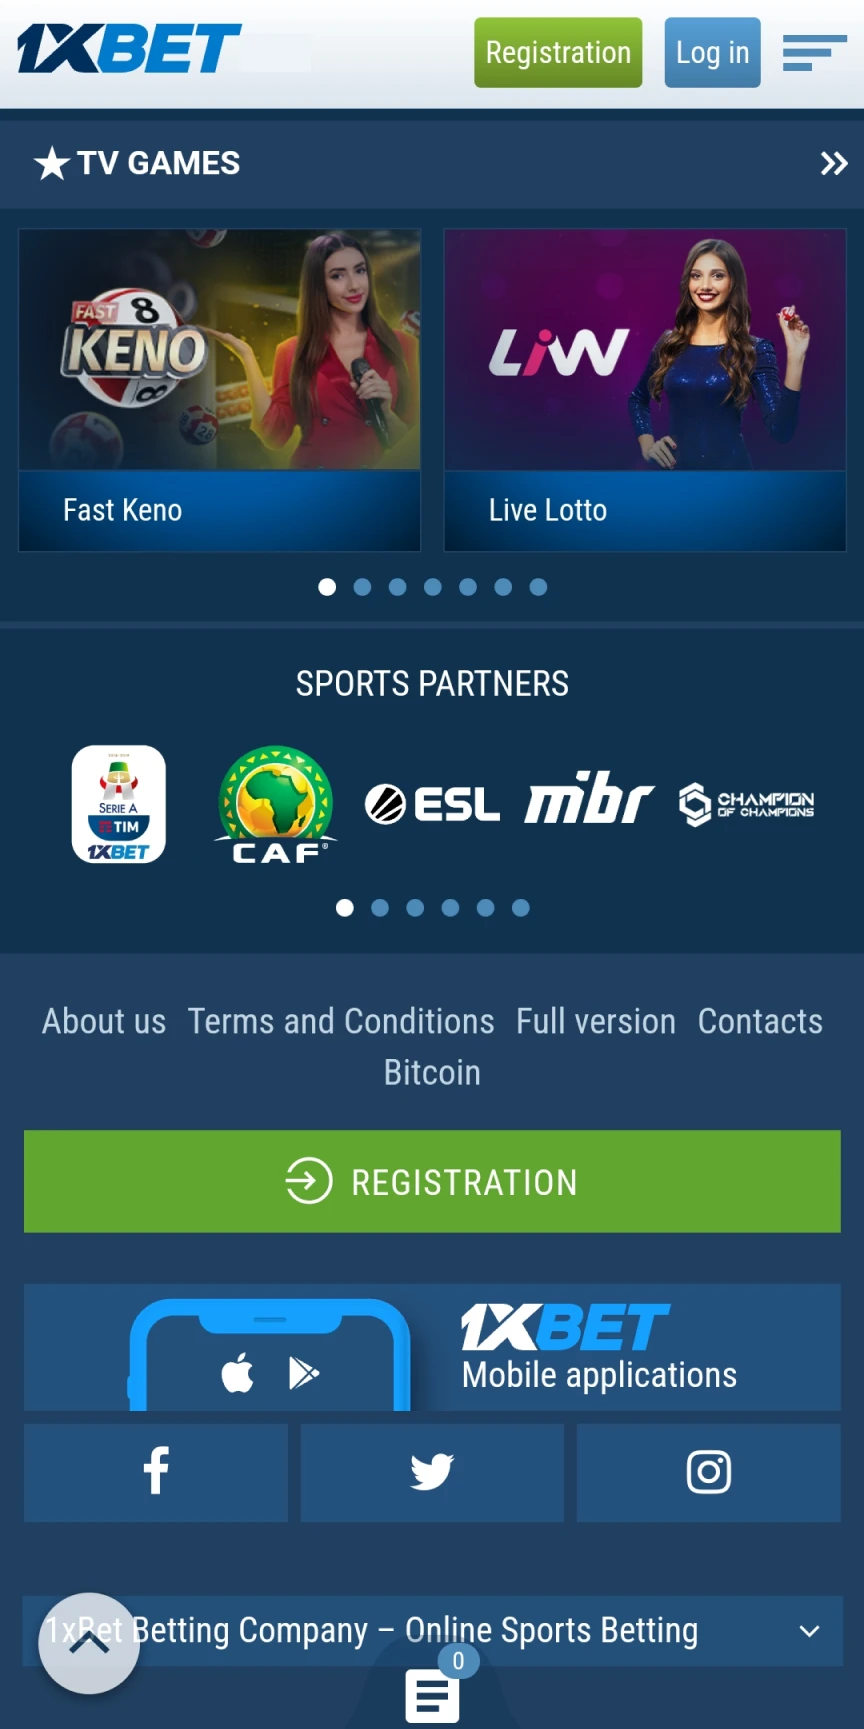 Find the 1xbet app to download on iOS.